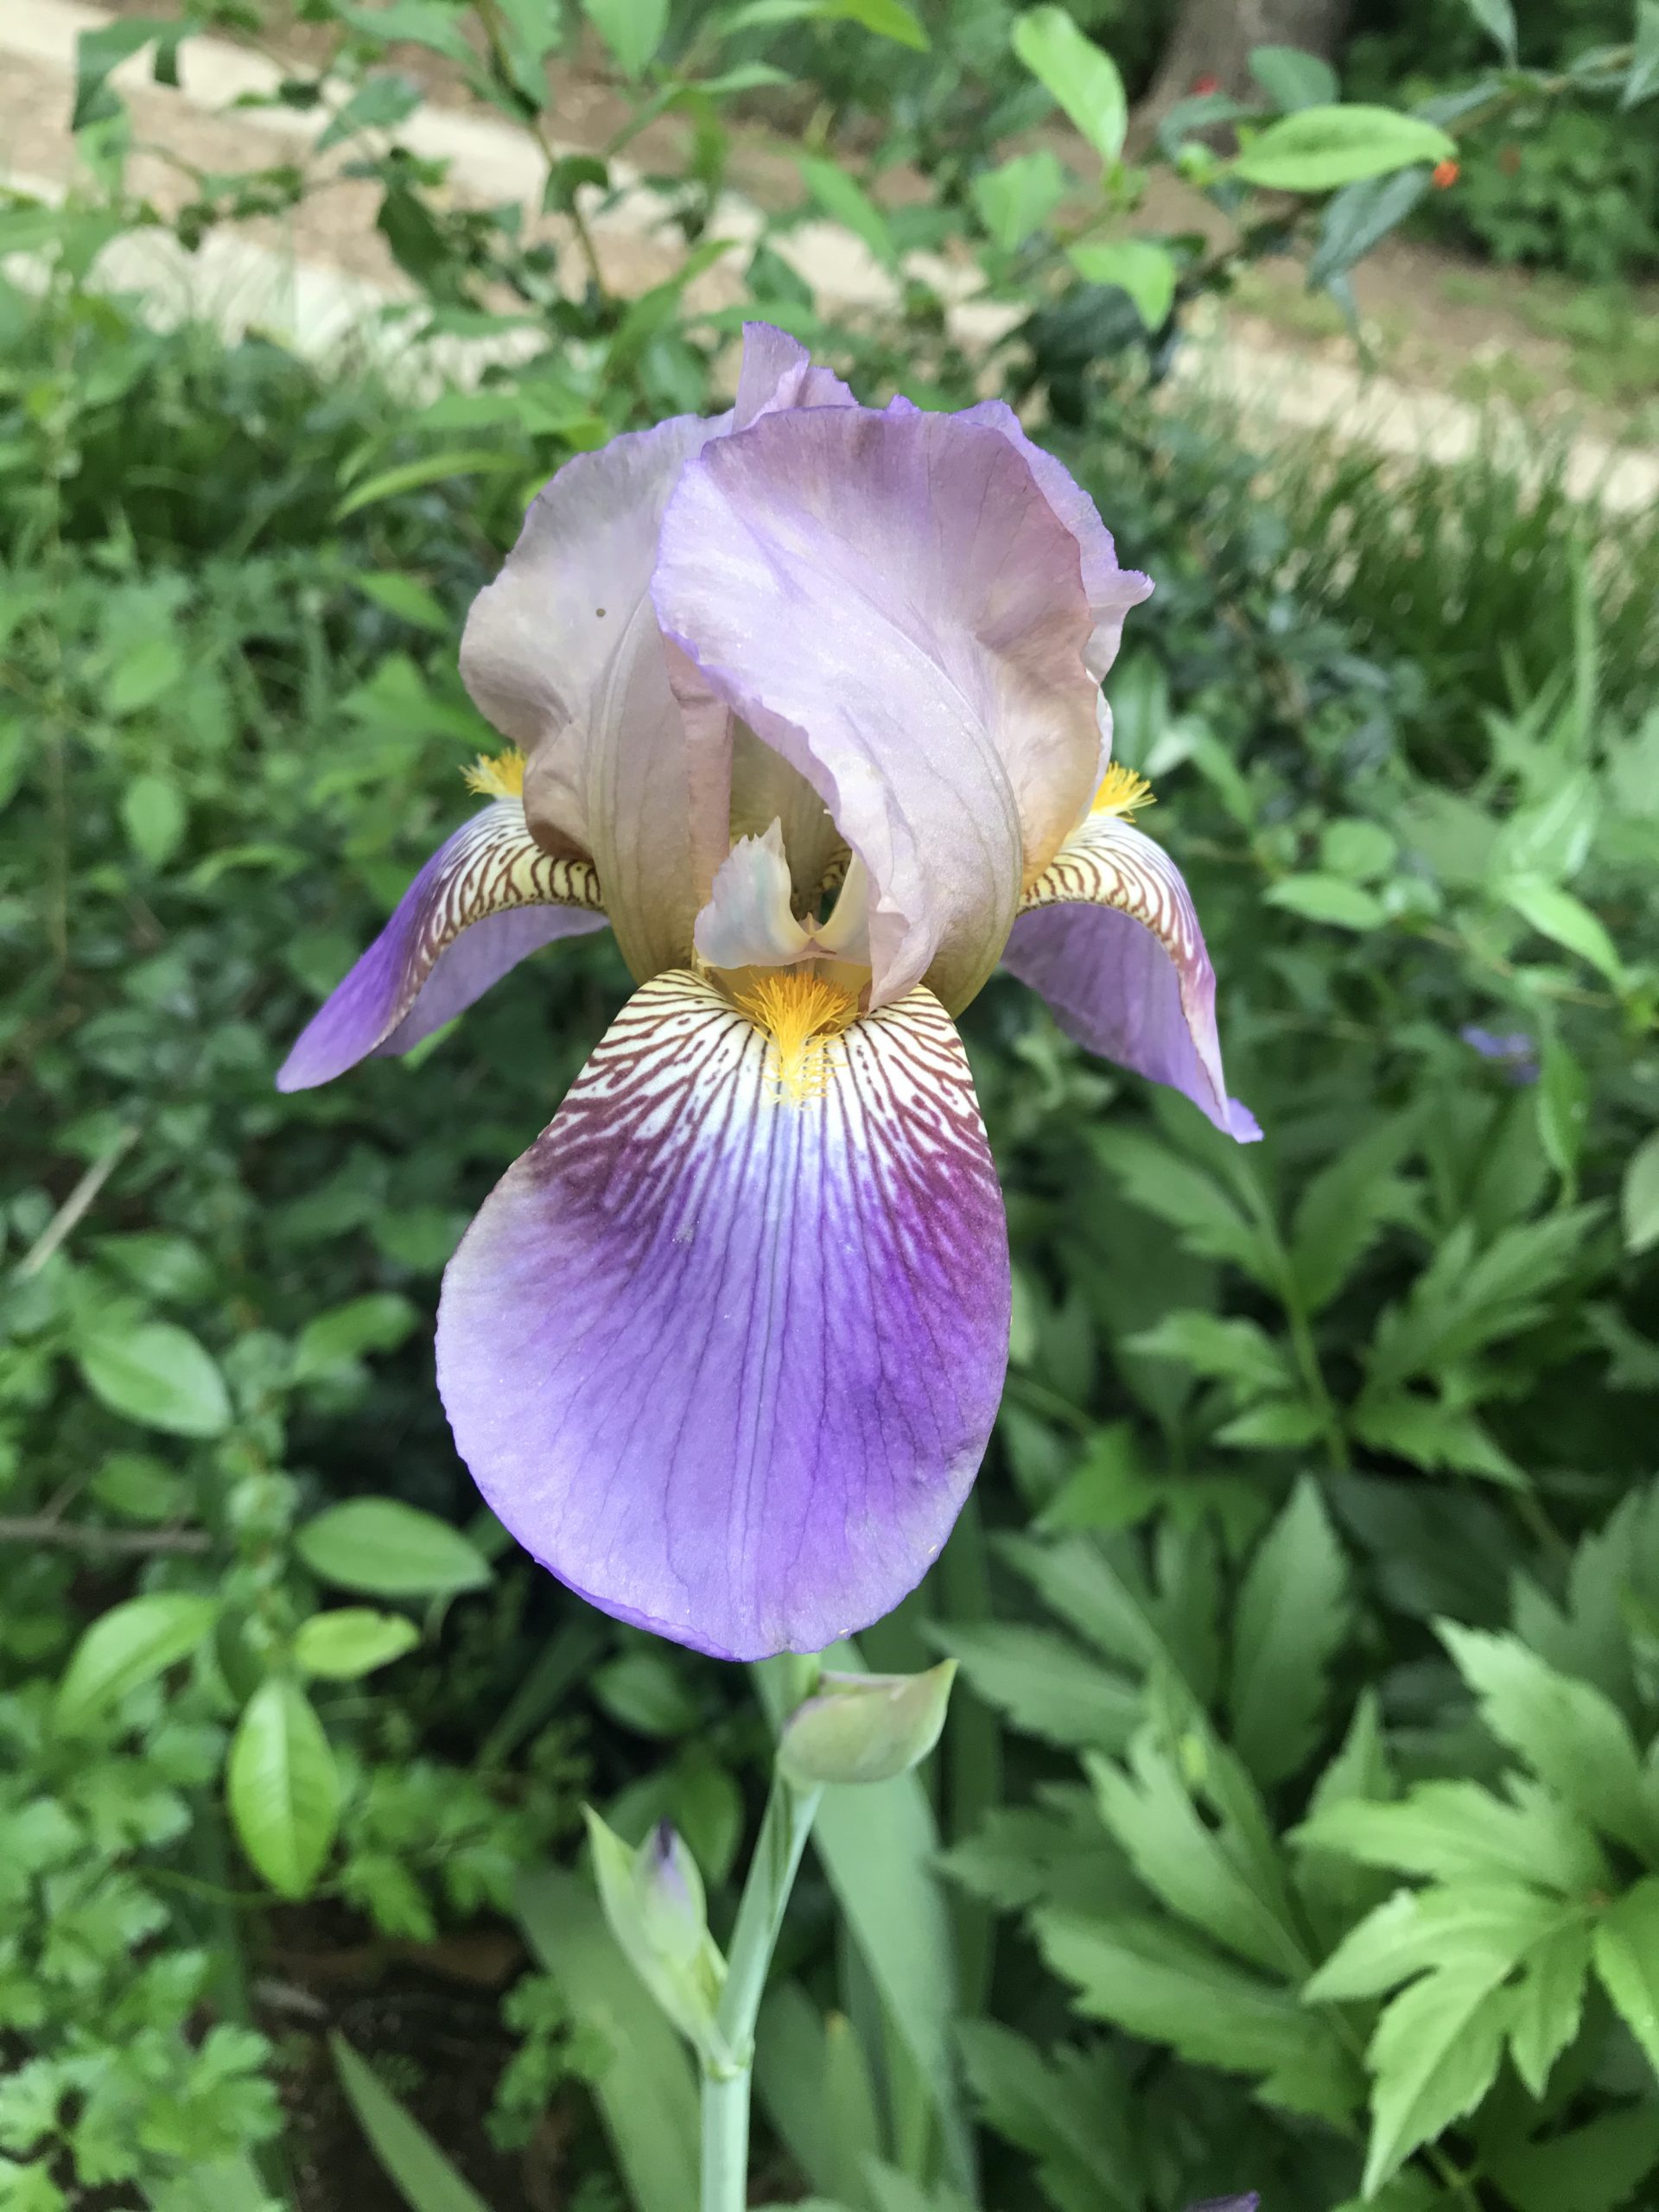 Who doesn’t love the Iris?